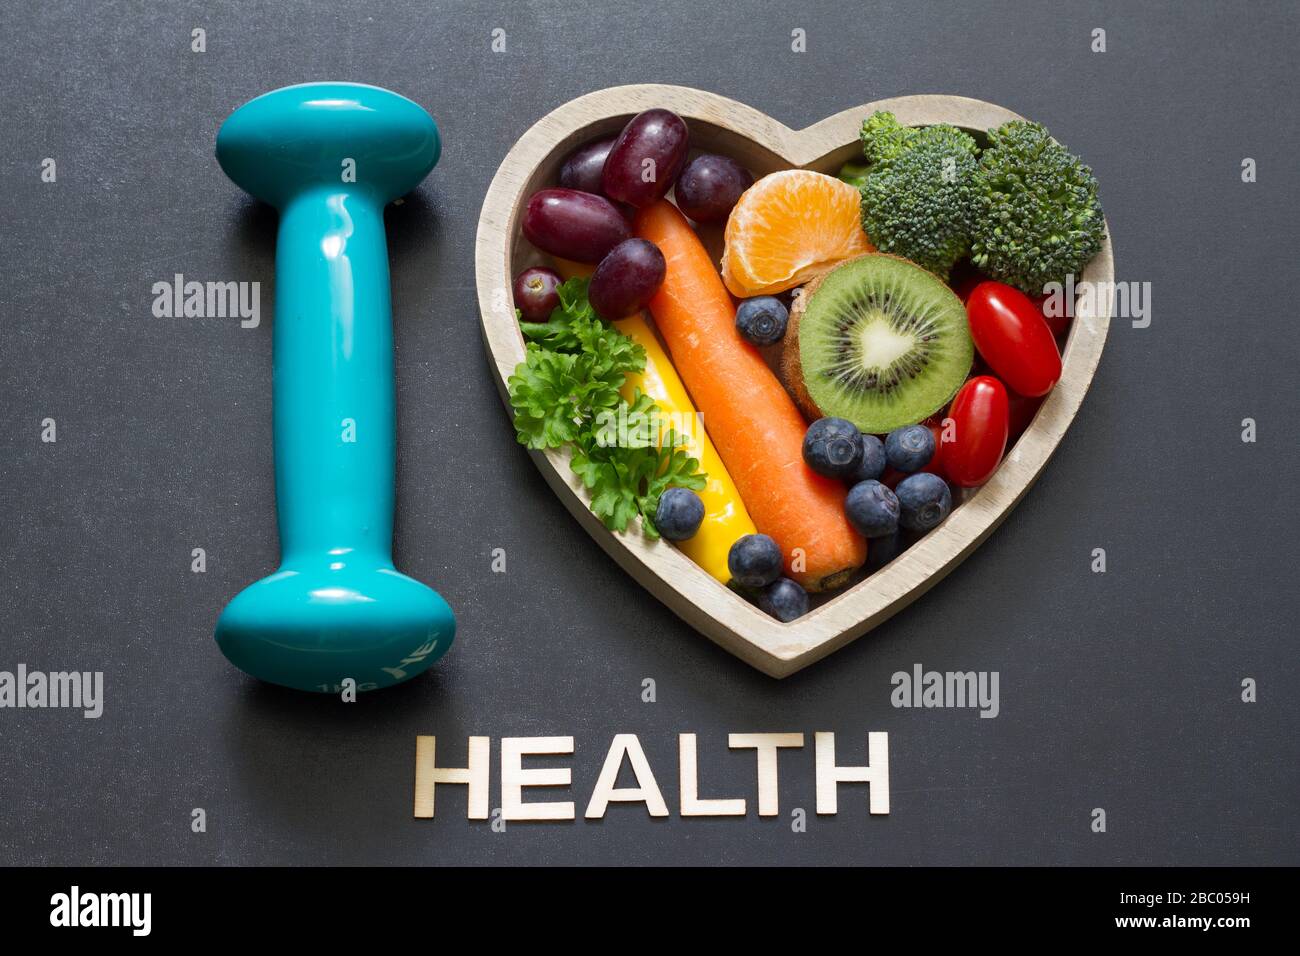 Health food in the heart and sport diet nutrition concept Stock Photo